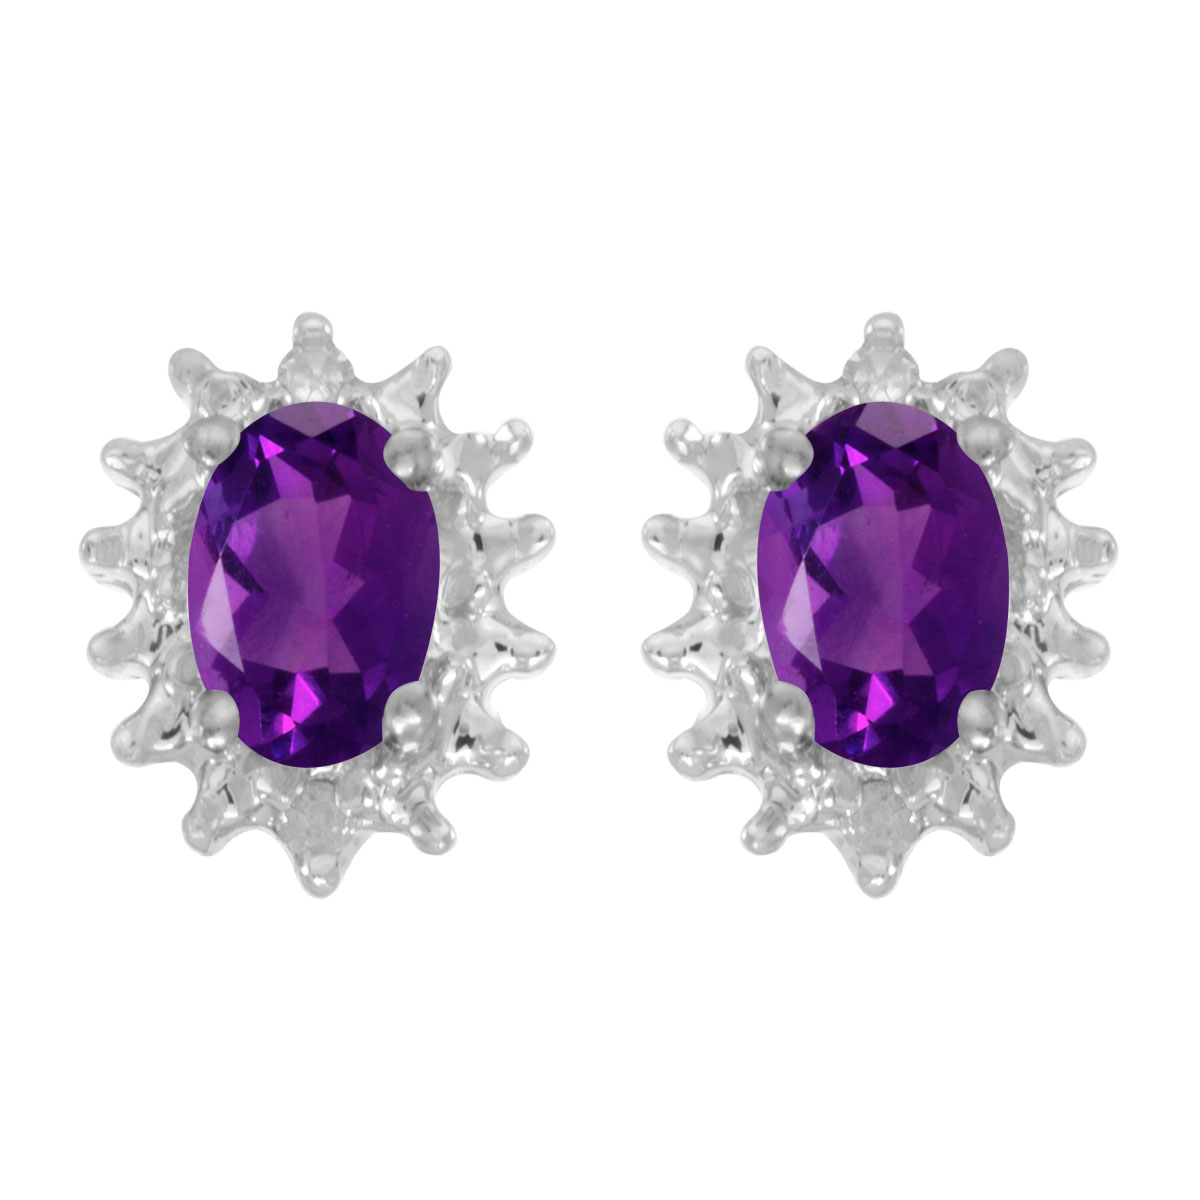 These 14k white gold oval amethyst and diamond earrings feature 6x4 mm genuine natural amethysts with a 0.68 ct total weight and .04 ct diamonds.